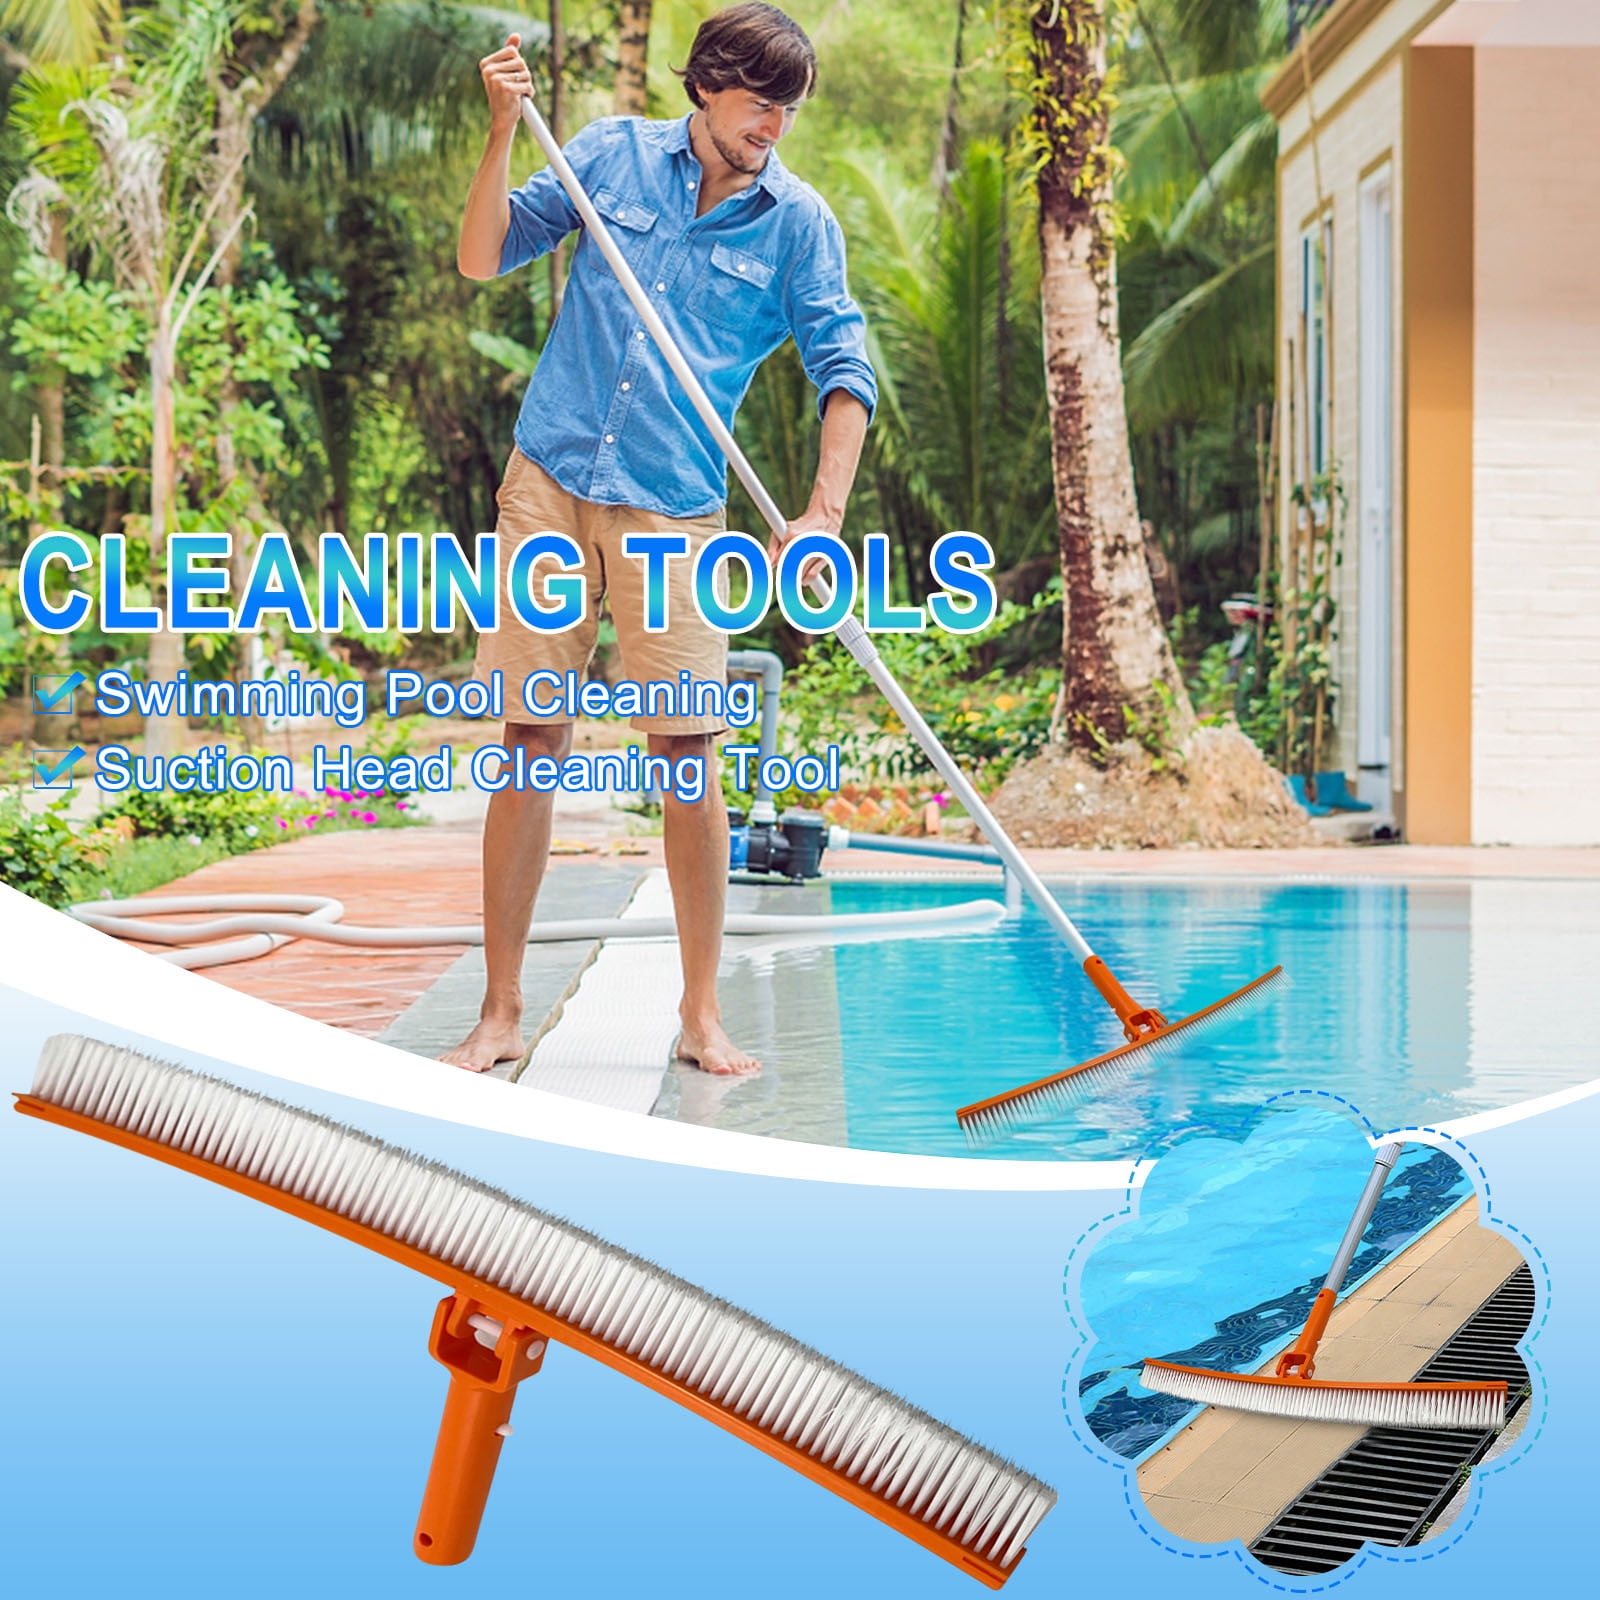 Swimming Pool Corner Steps Brush Heavy Duty Scrubbing Power Aquarium Algae  Moss Cleaning Brushes Cleaner Tools For Stairs Spa Jets Walls Tiles Floors